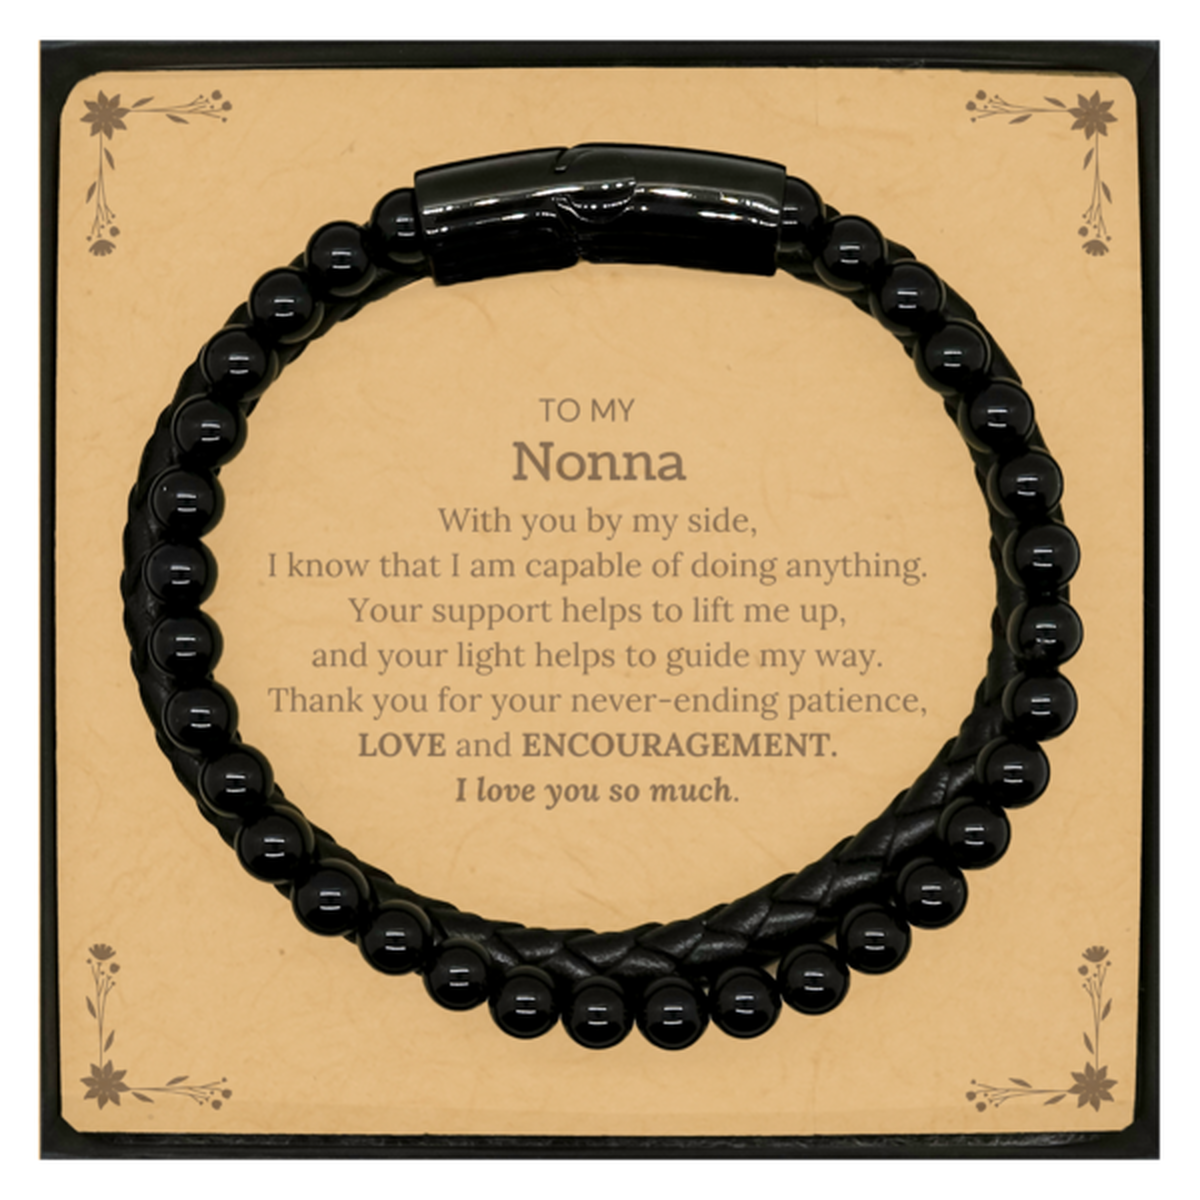 Appreciation Nonna Stone Leather Bracelets Gifts, To My Nonna Birthday Christmas Wedding Keepsake Gifts for Nonna With you by my side, I know that I am capable of doing anything. I love you so much